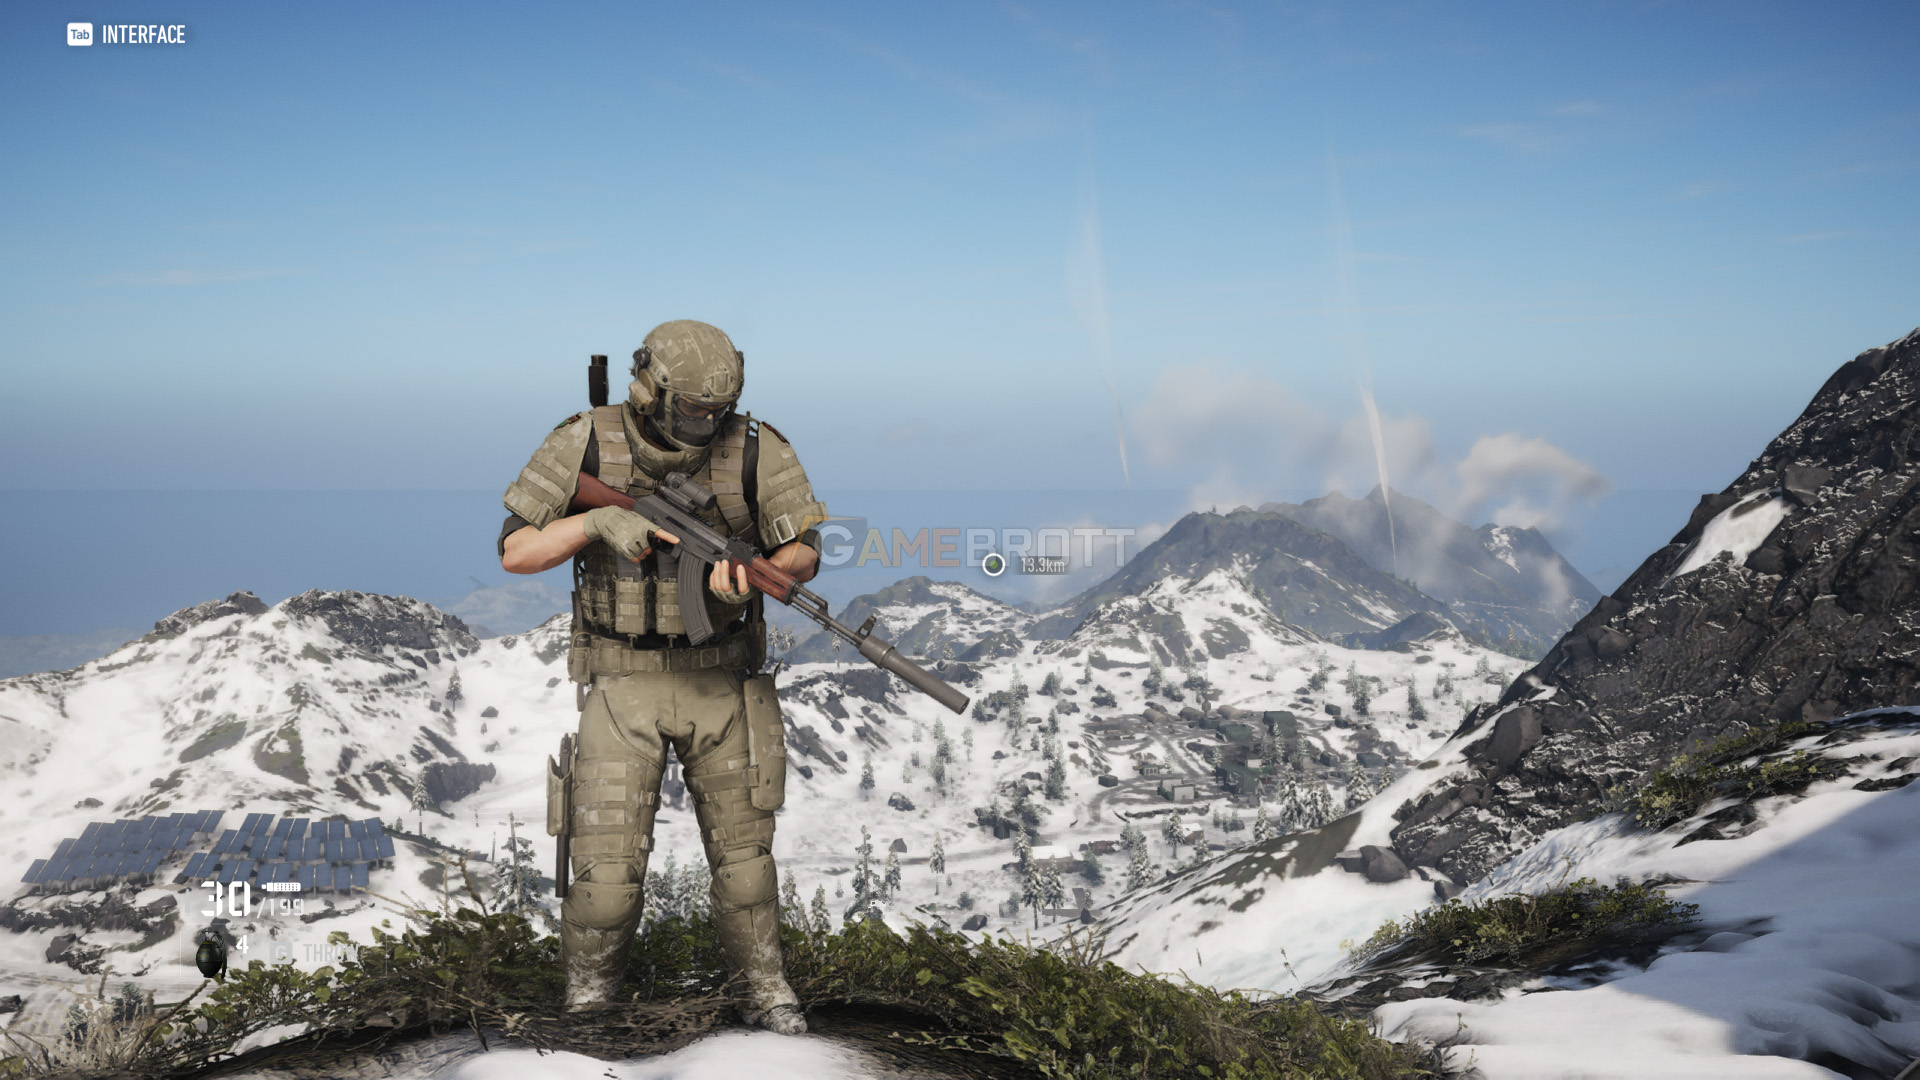 Tom Clancys Ghost Recon Breakpoint Screenshot 2019.10.05 13.43.07.35